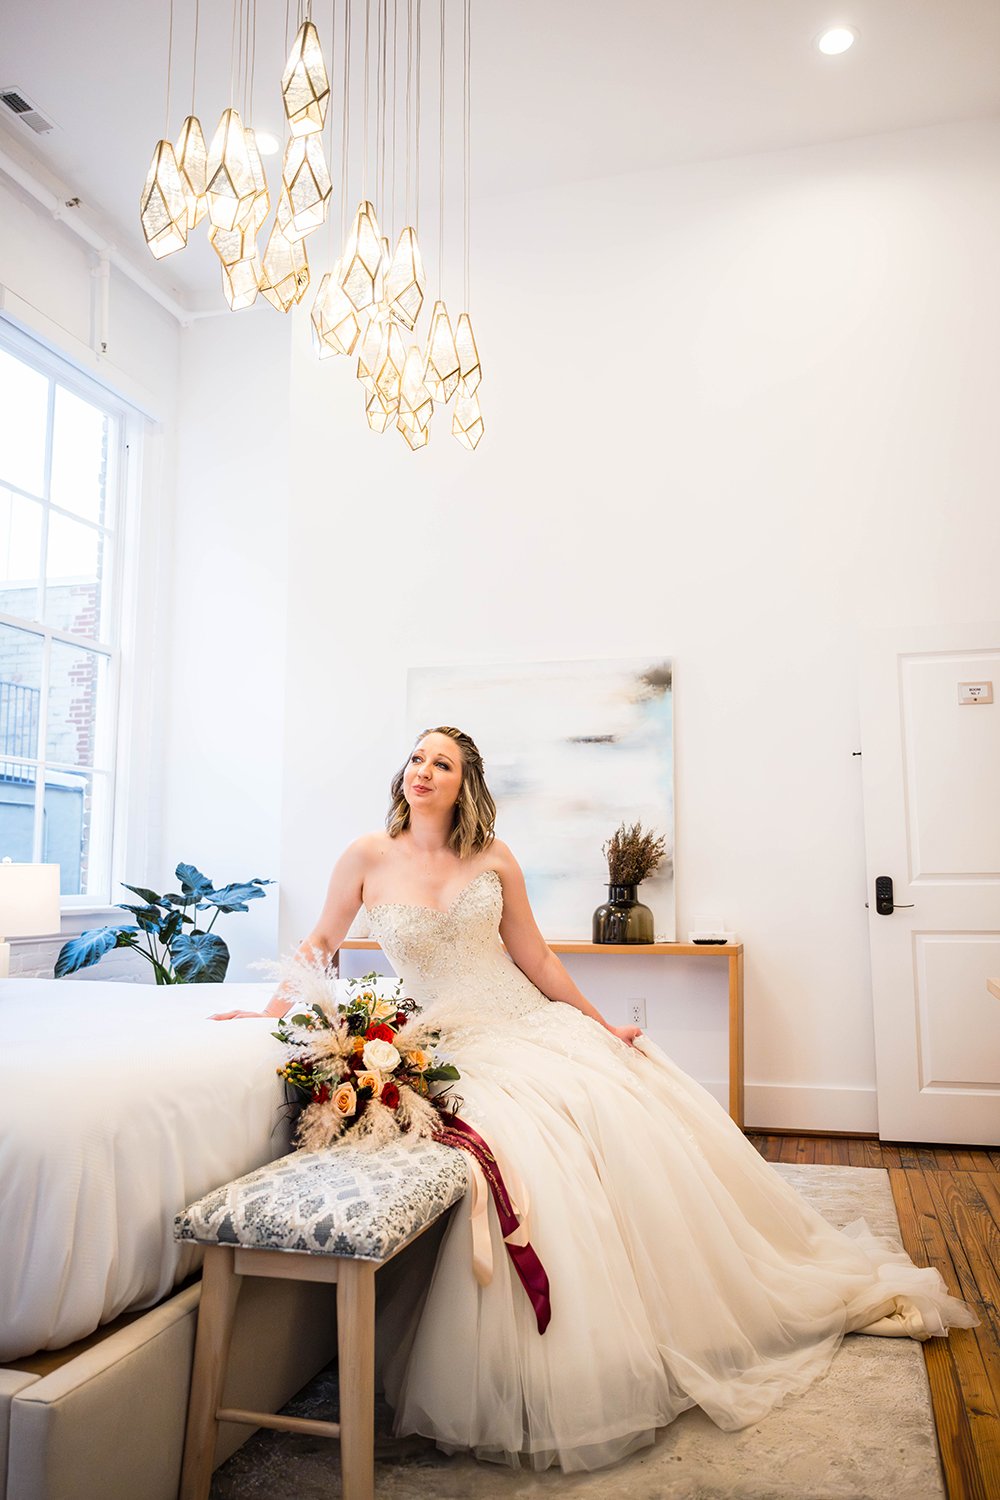 A woman in a wedding dress sits on a bench at the end of the bed in her hotel room with her bouquet by her side and looks up towards the intricate light fixtures in her room.